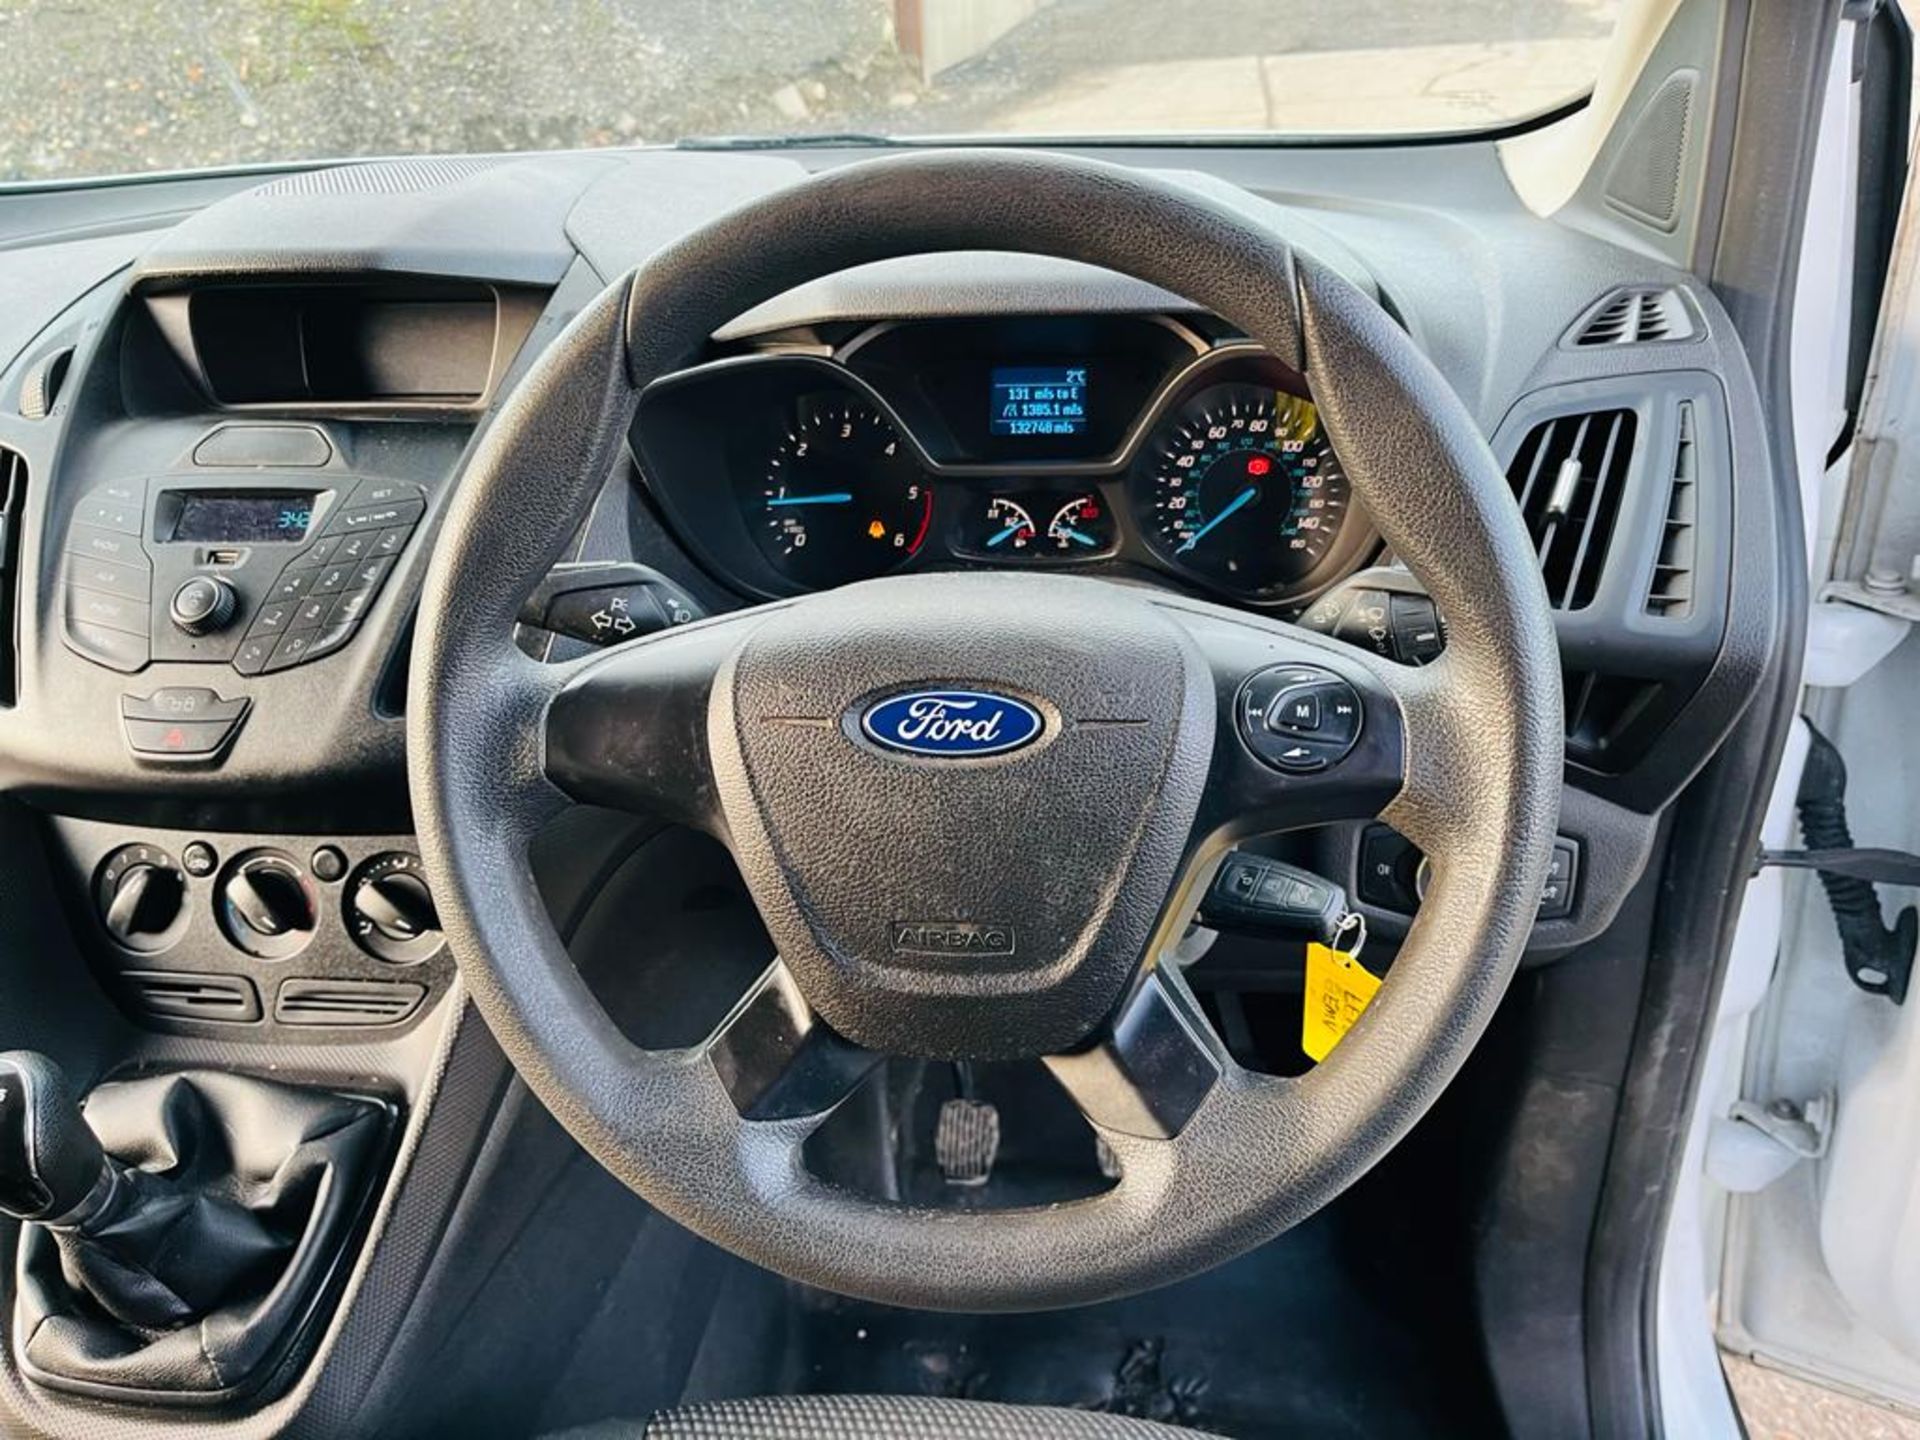 ** ON SALE ** Ford Transit Connect TDCI 75 210 1.5 2018 '18 Reg' ULEZ Compliant -Bluetooth Handsfree - Image 19 of 28